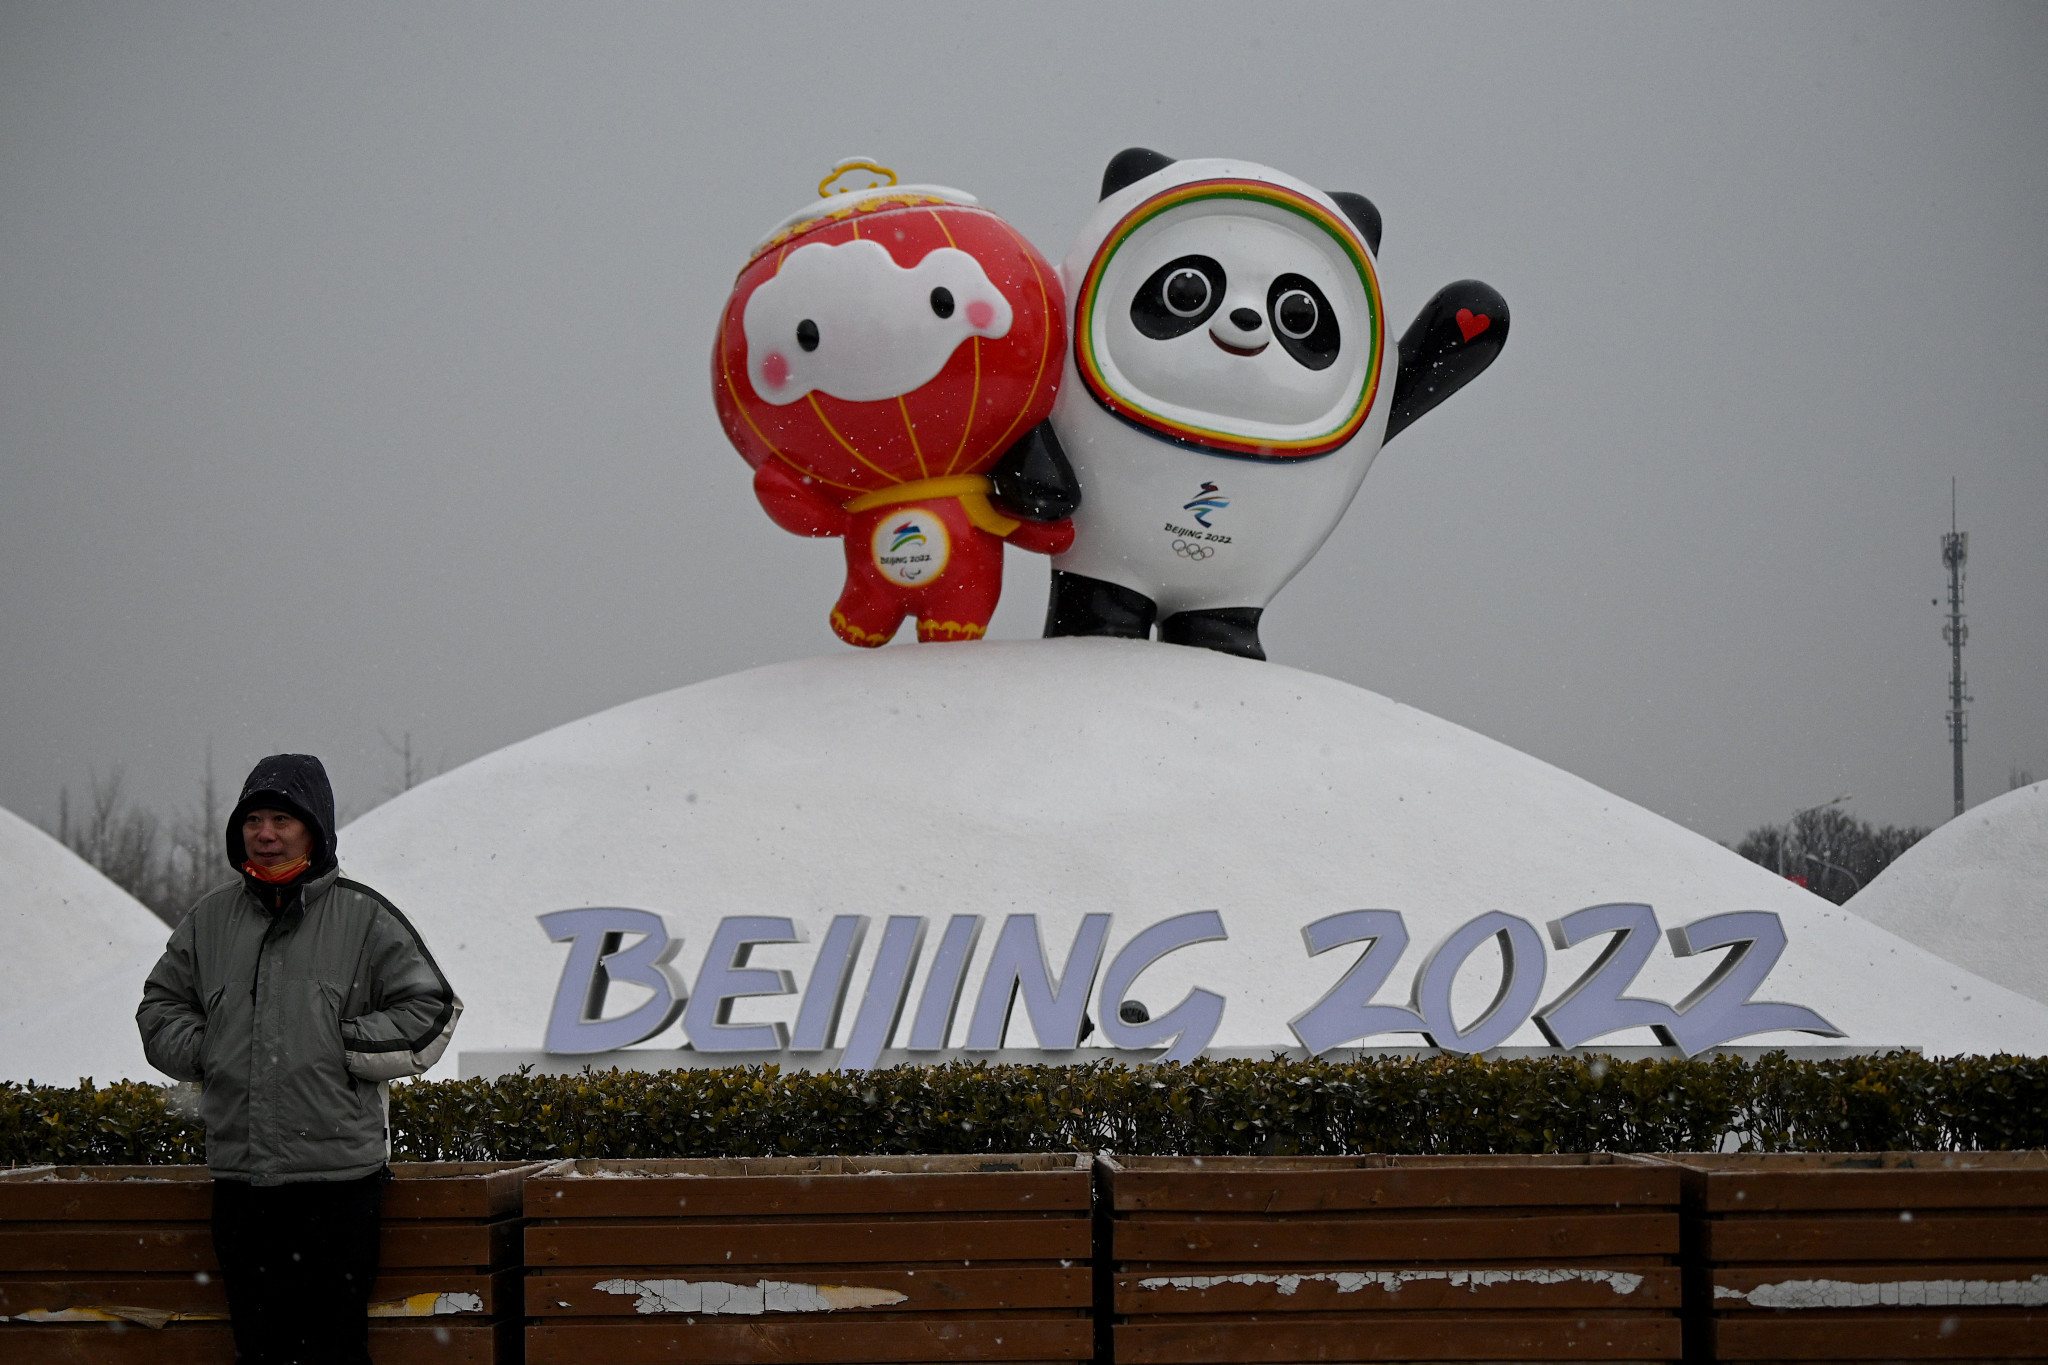 The ITA has signed a cooperation agreement with Chinese Government agencies for Beijing 2022 ©Getty Images